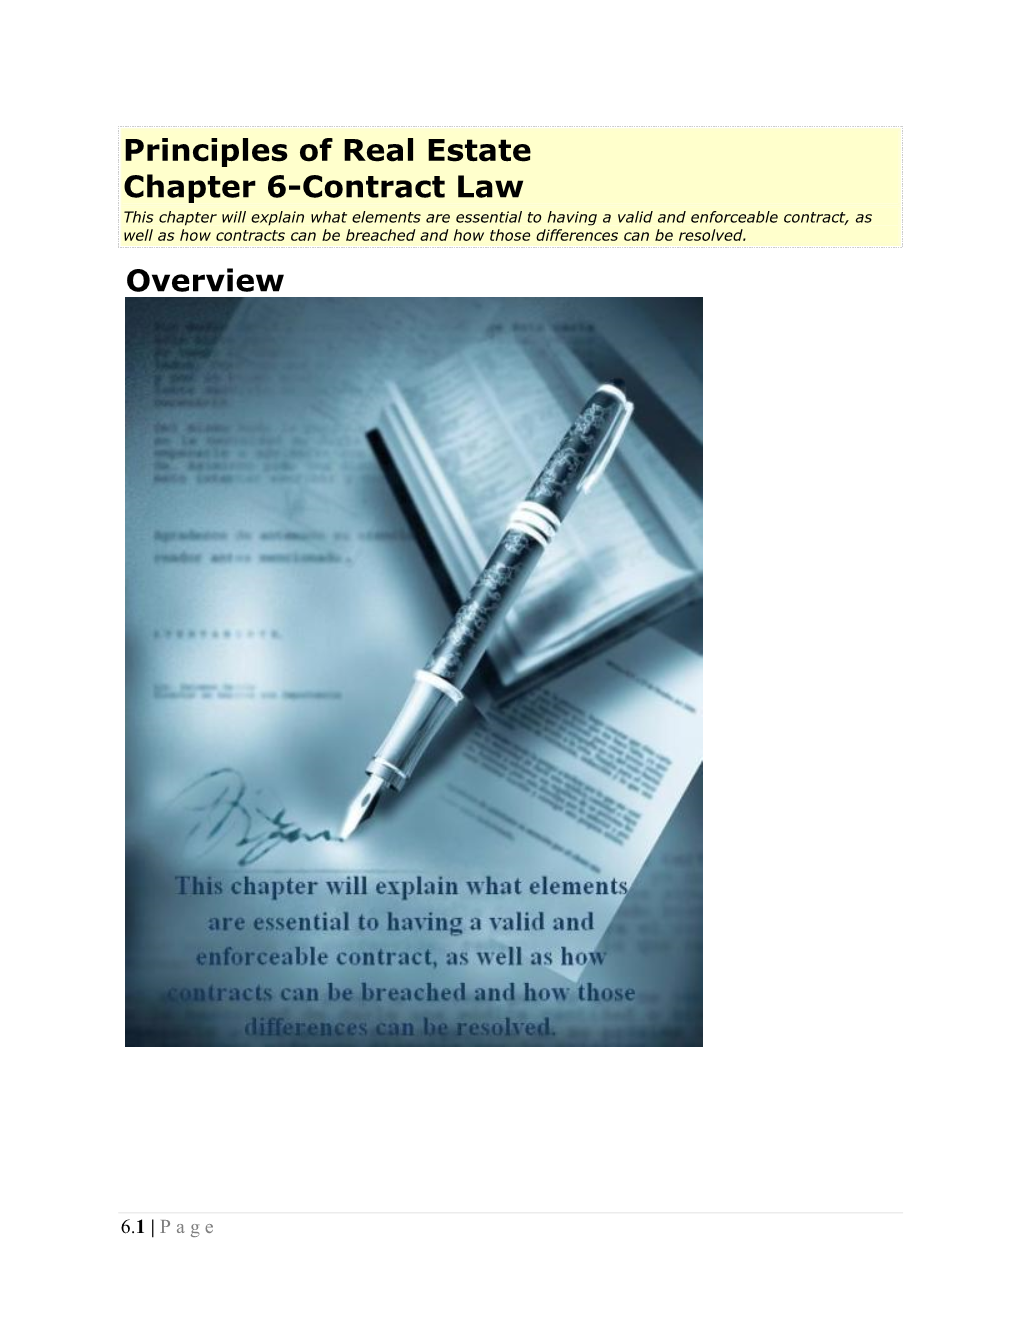 Chapter 6-Contract Law (Principles of Real Estate)